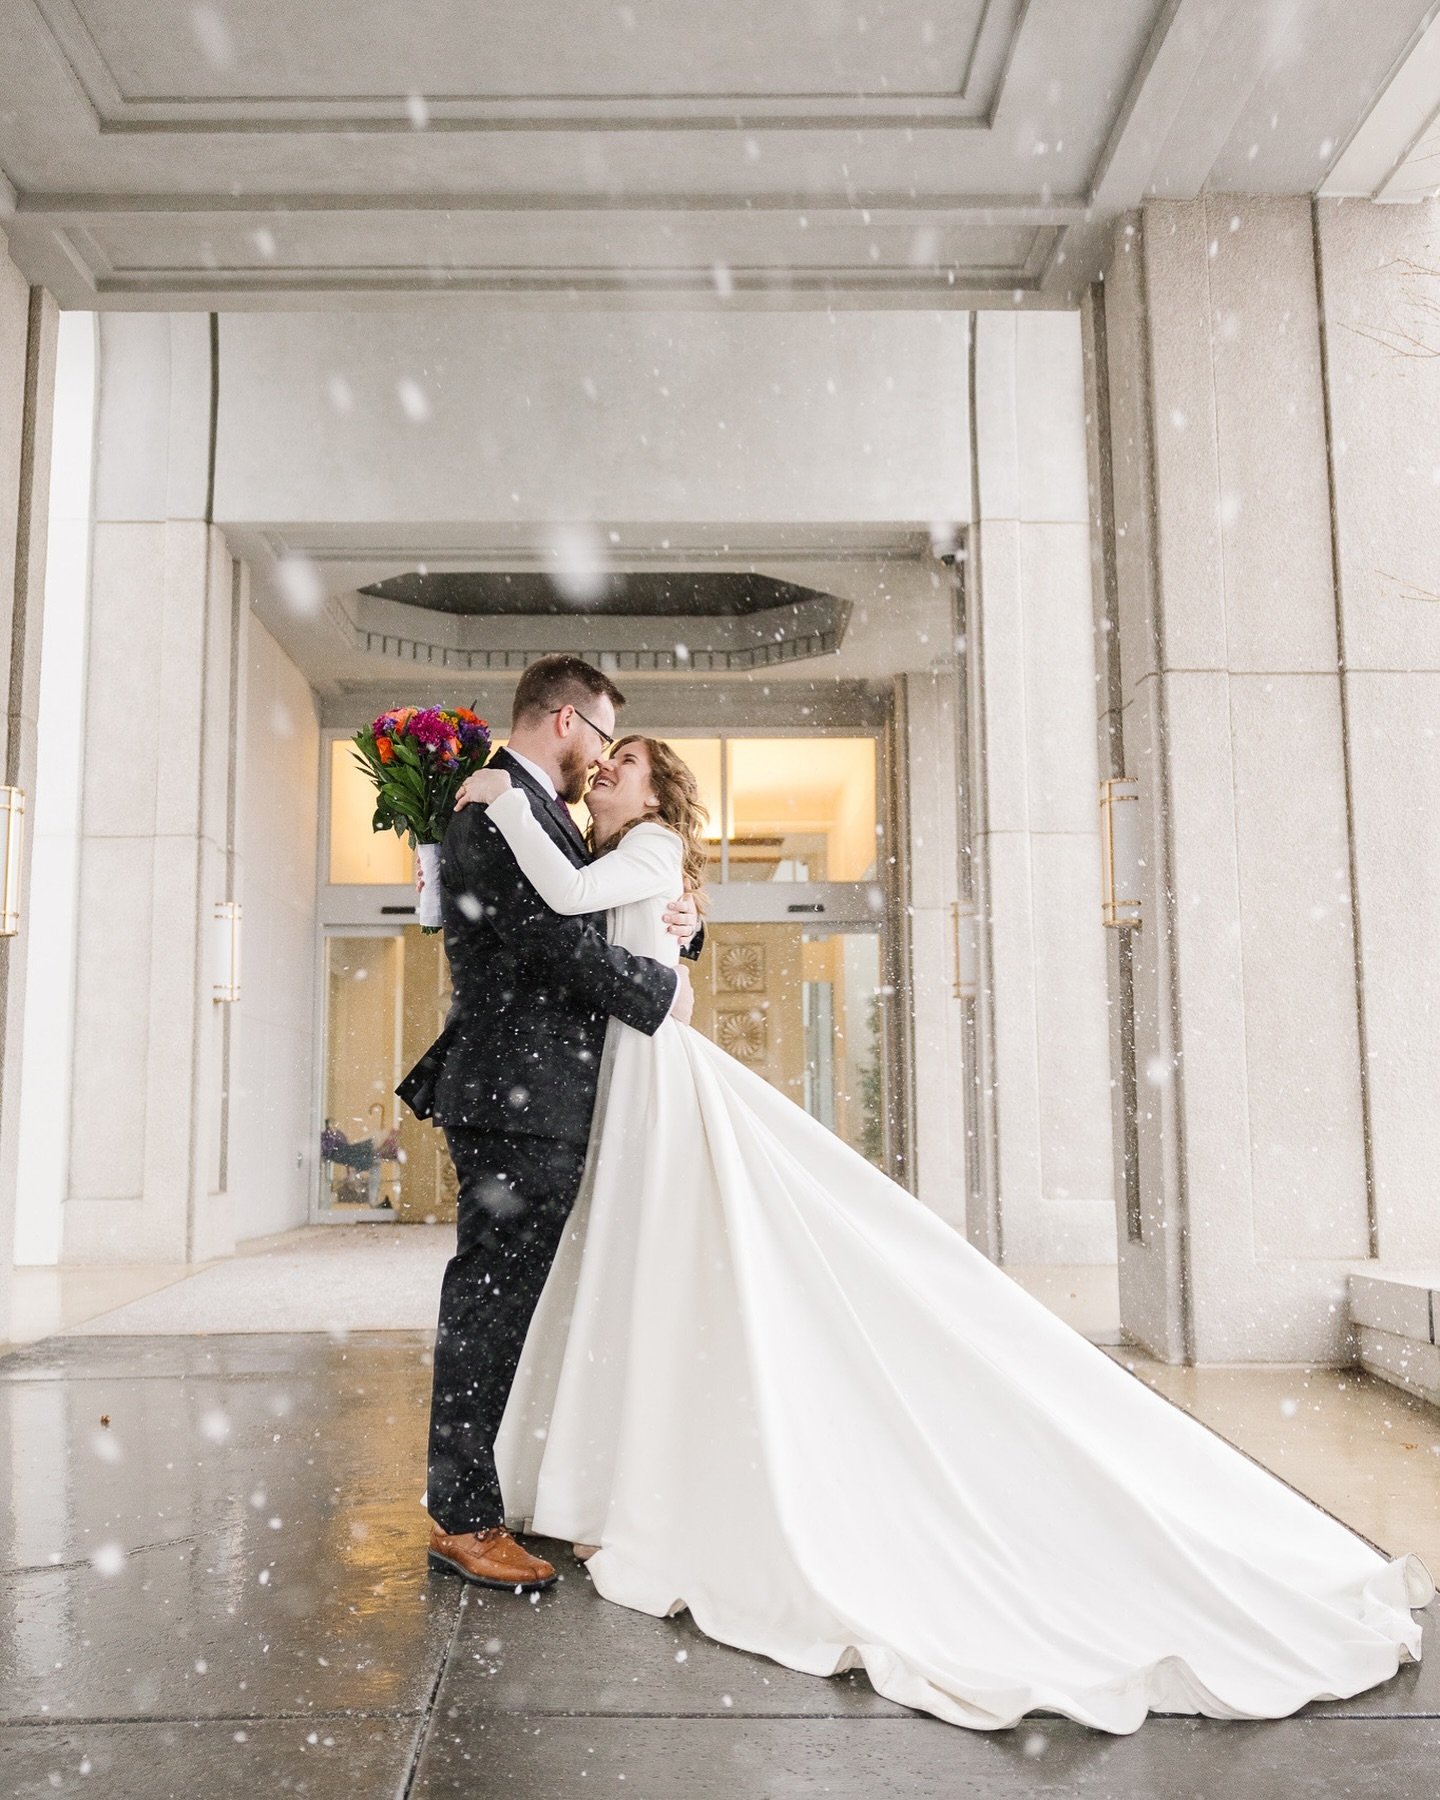 Do you remember that crazy windy, snowy day at the beginning of March? Jadie and Devin got married that day and even though the weather was a little insane, they were positive and happy&hellip; and freezing cold. Congrats to them! Later in the month 